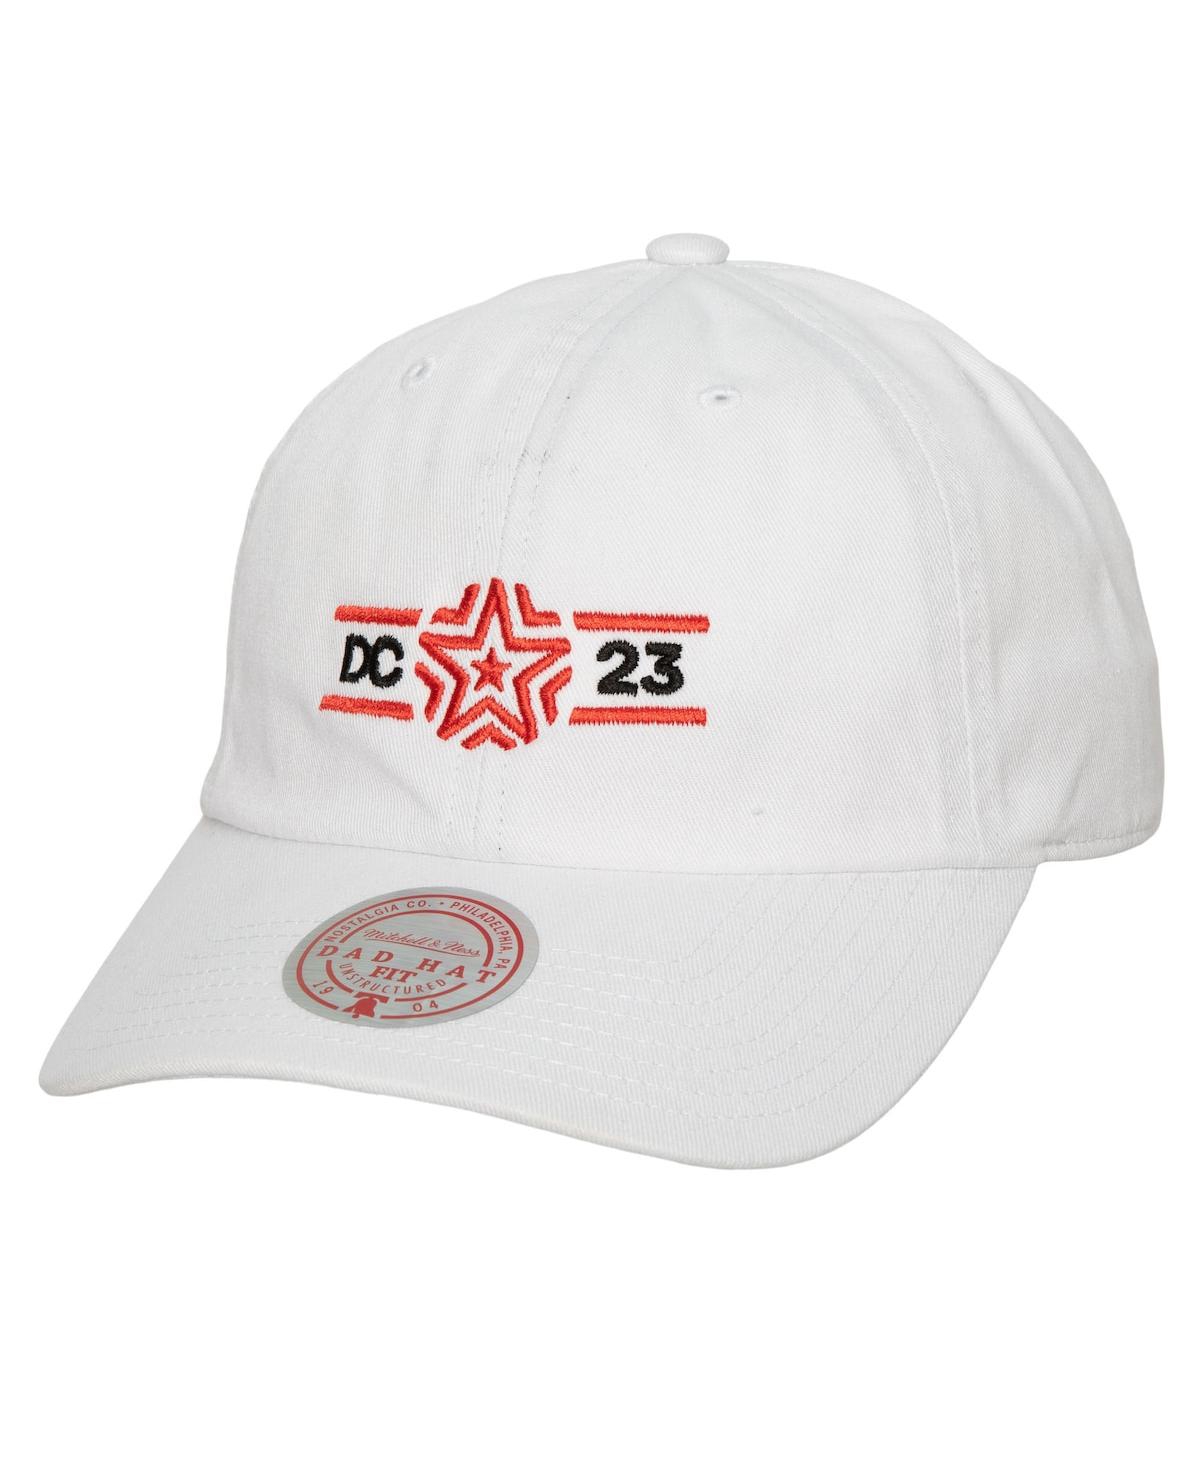 Mitchell & Ness Men's  White 2023 Mls All-star Game Adjustable Dad Hat